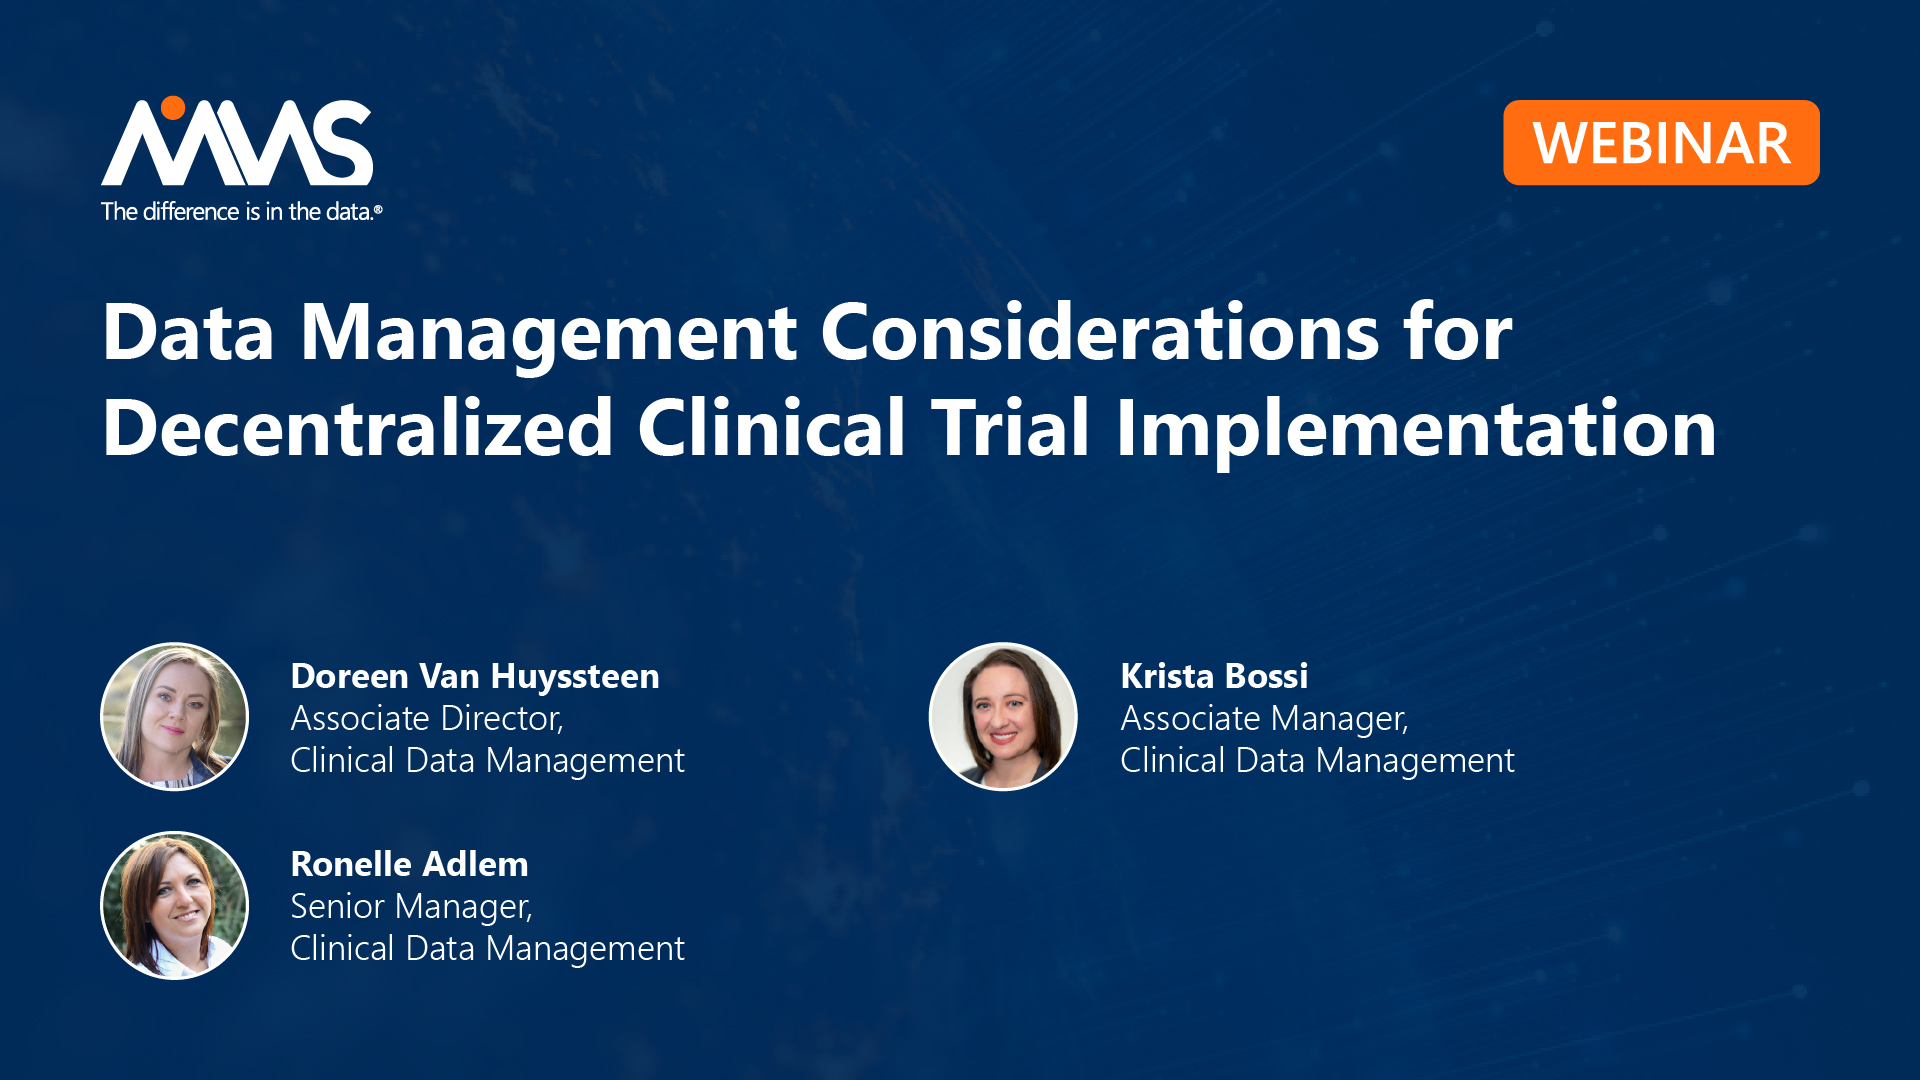 Data Management Considerations for Decentralized Clinical Trial Implementation